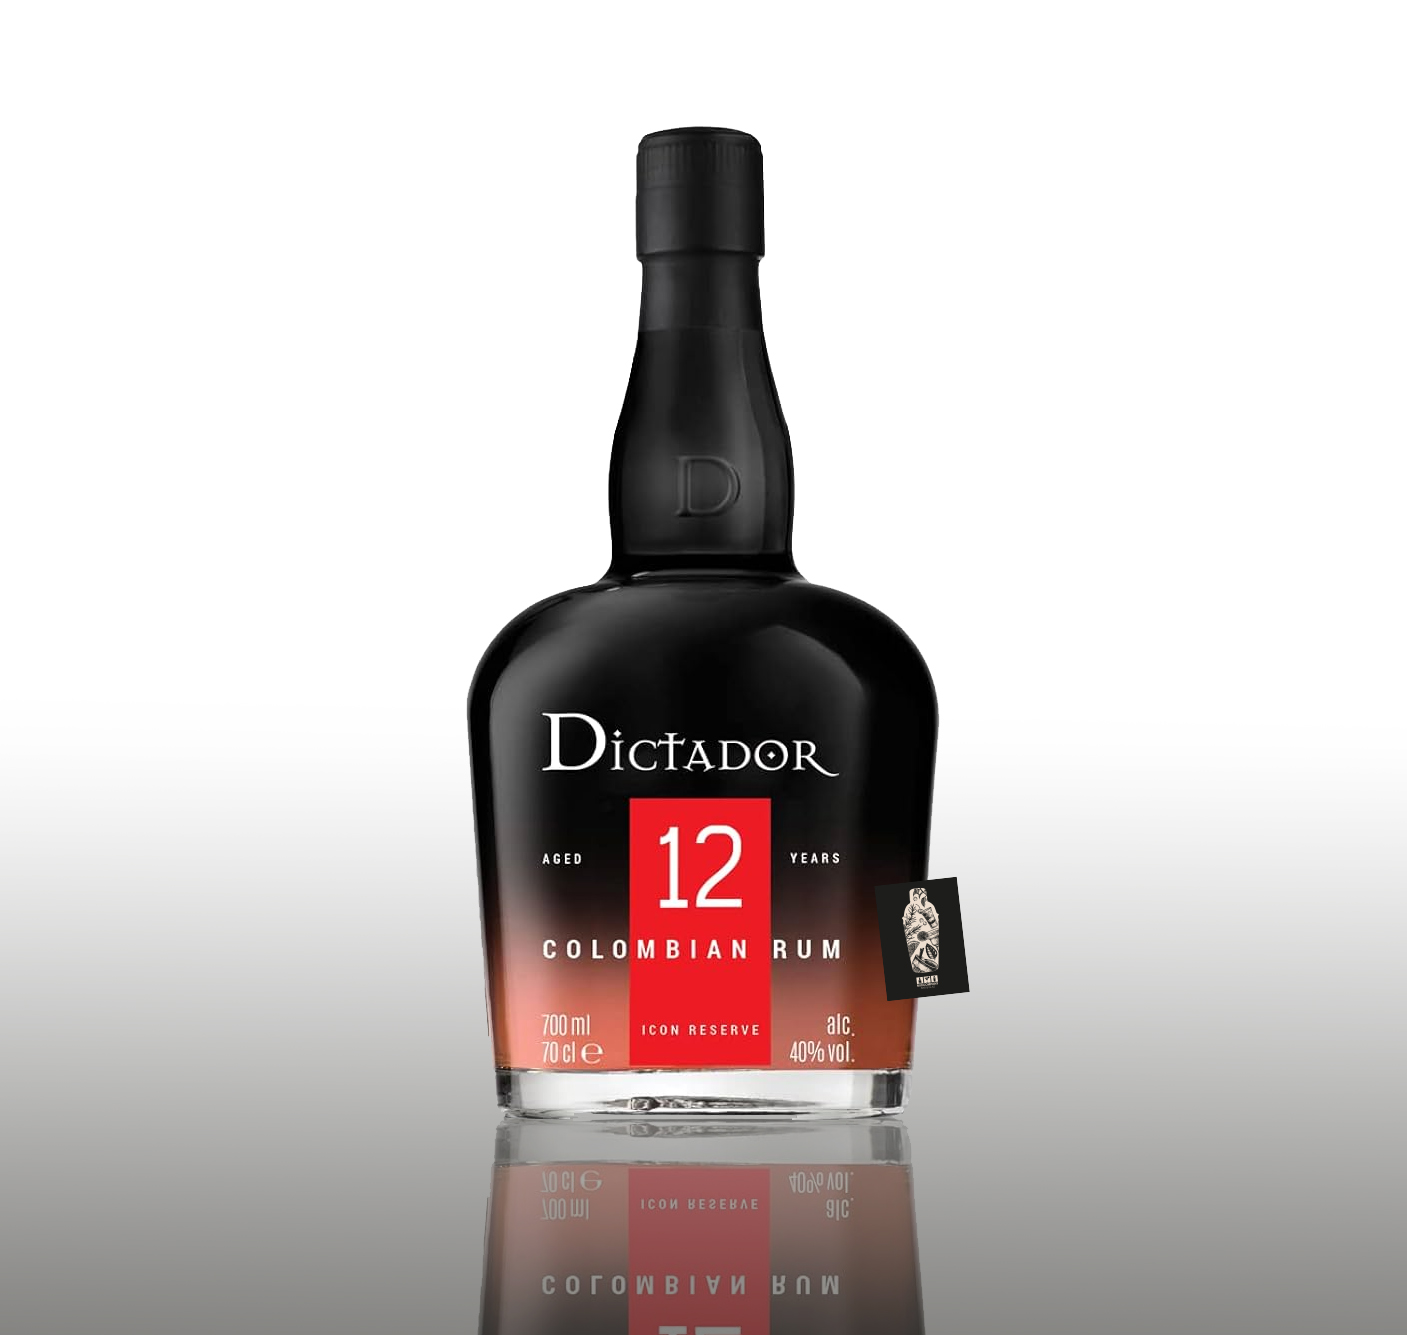 Dictador Columbian Rum 0,7L (40% vol.) aged 12 years - [Enthält Sulfite]